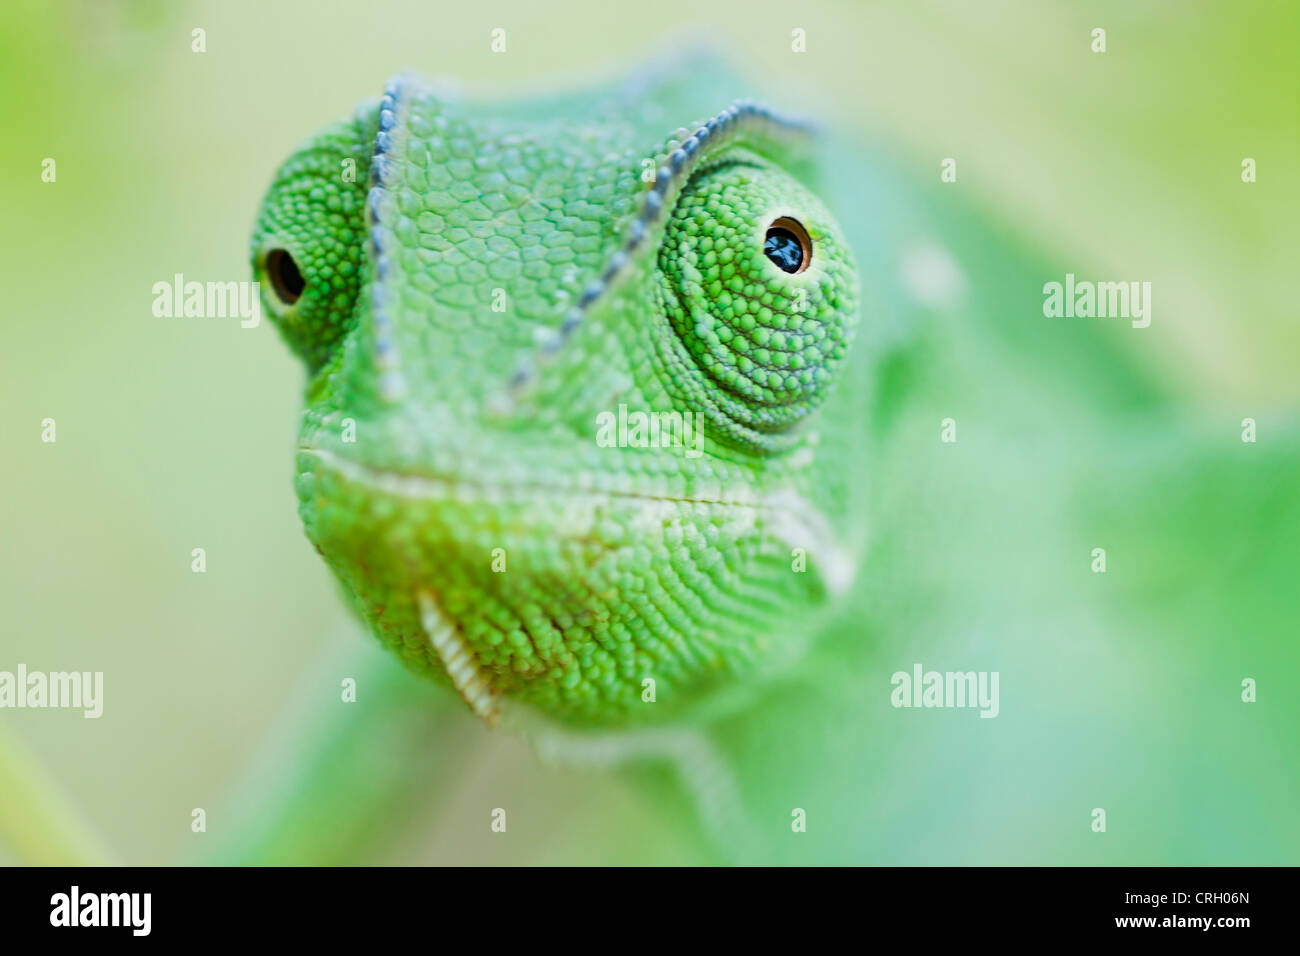 Green chameleon looking in opposing directions Stock Photo